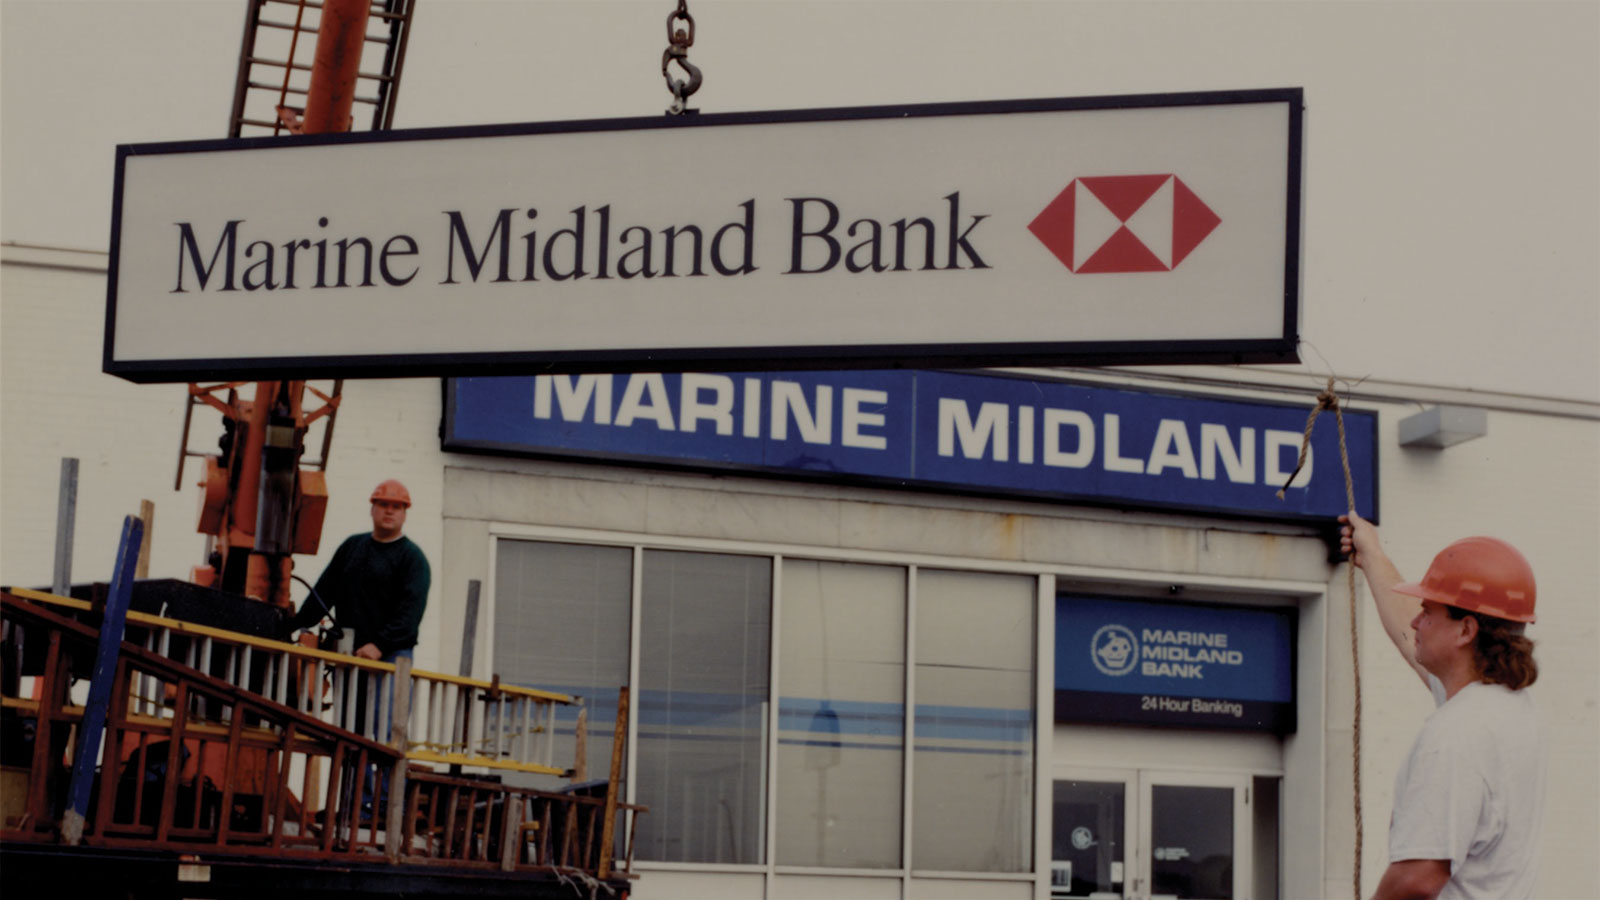 A US Marine Midland Bank branch has an HSBC-branded sign installed